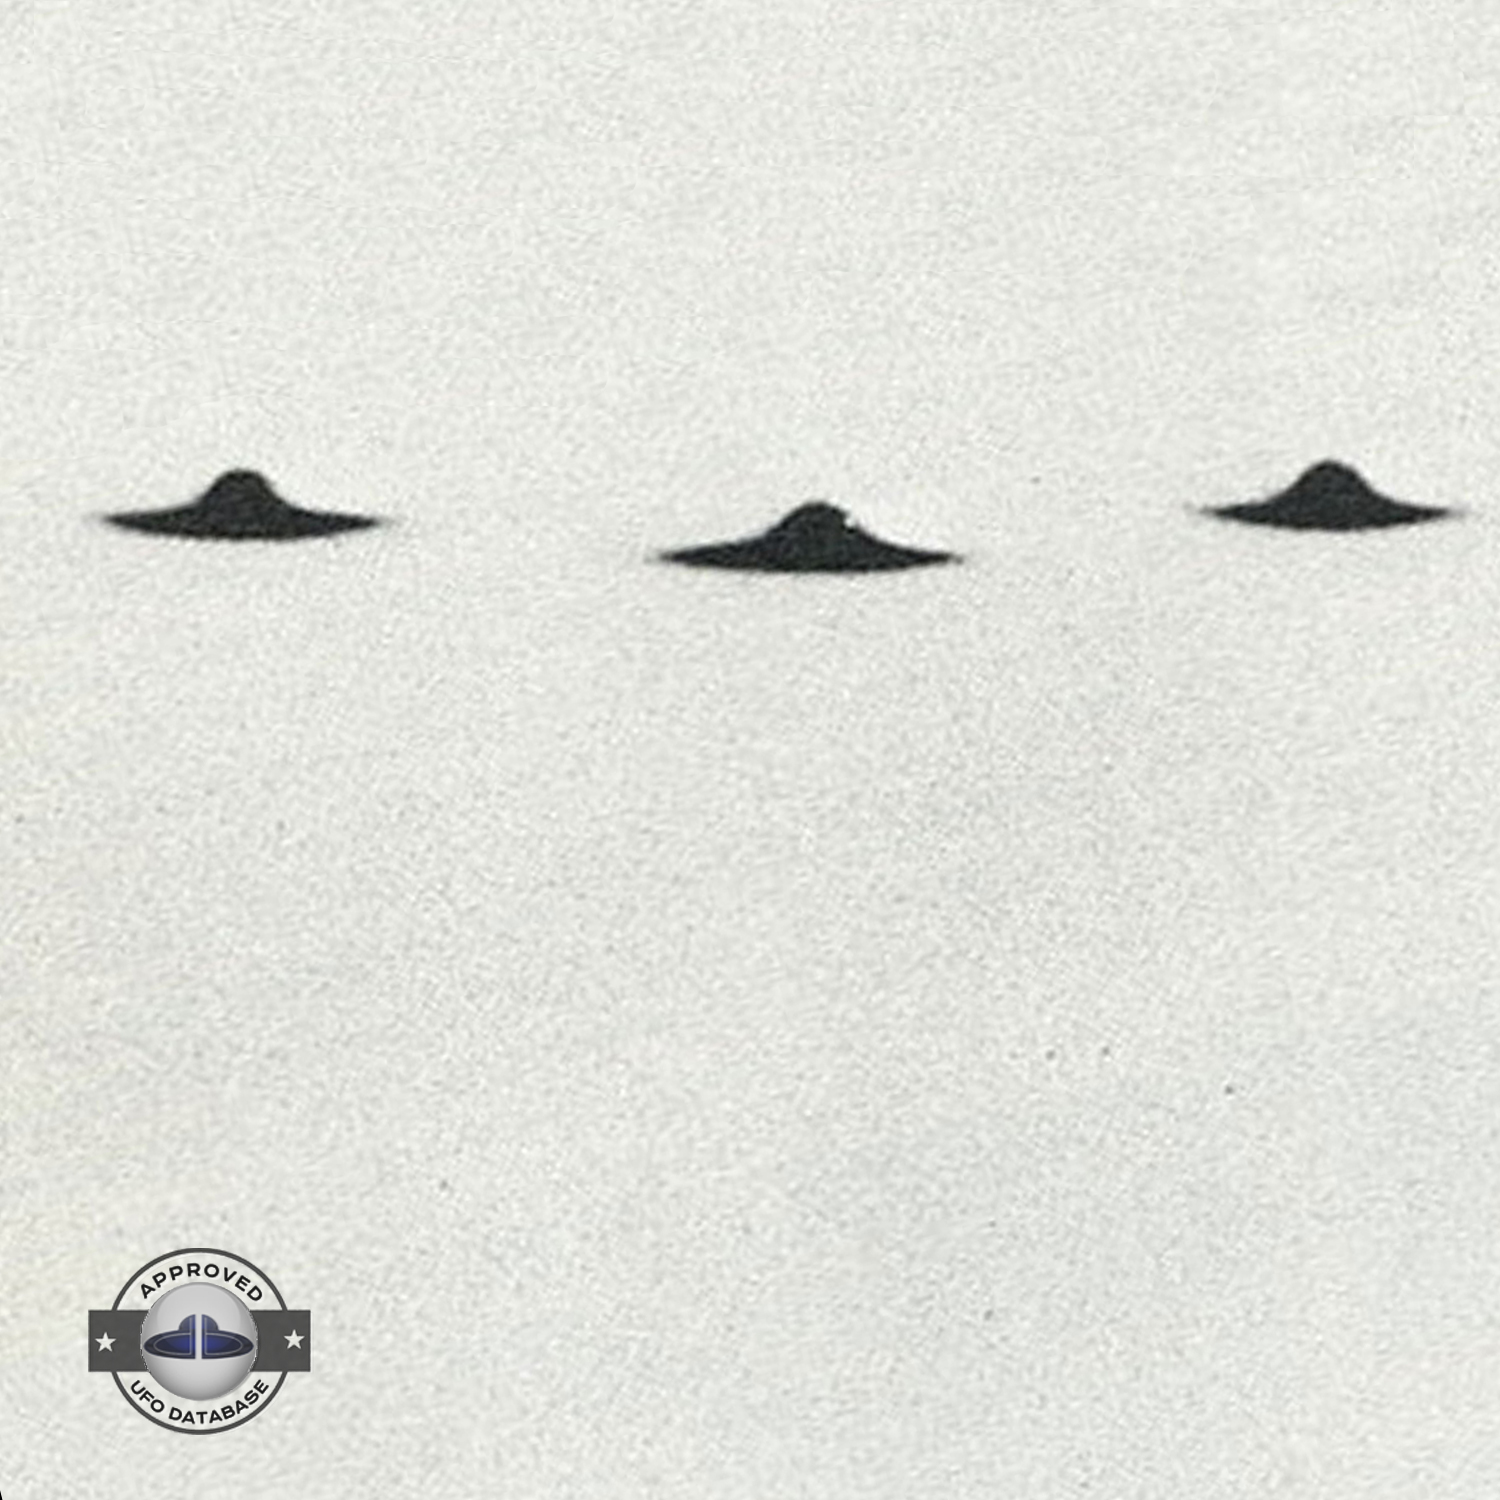 UFO picture lack of three dimensional aspect. 3 UFOs are very similar UFO Picture #136-3